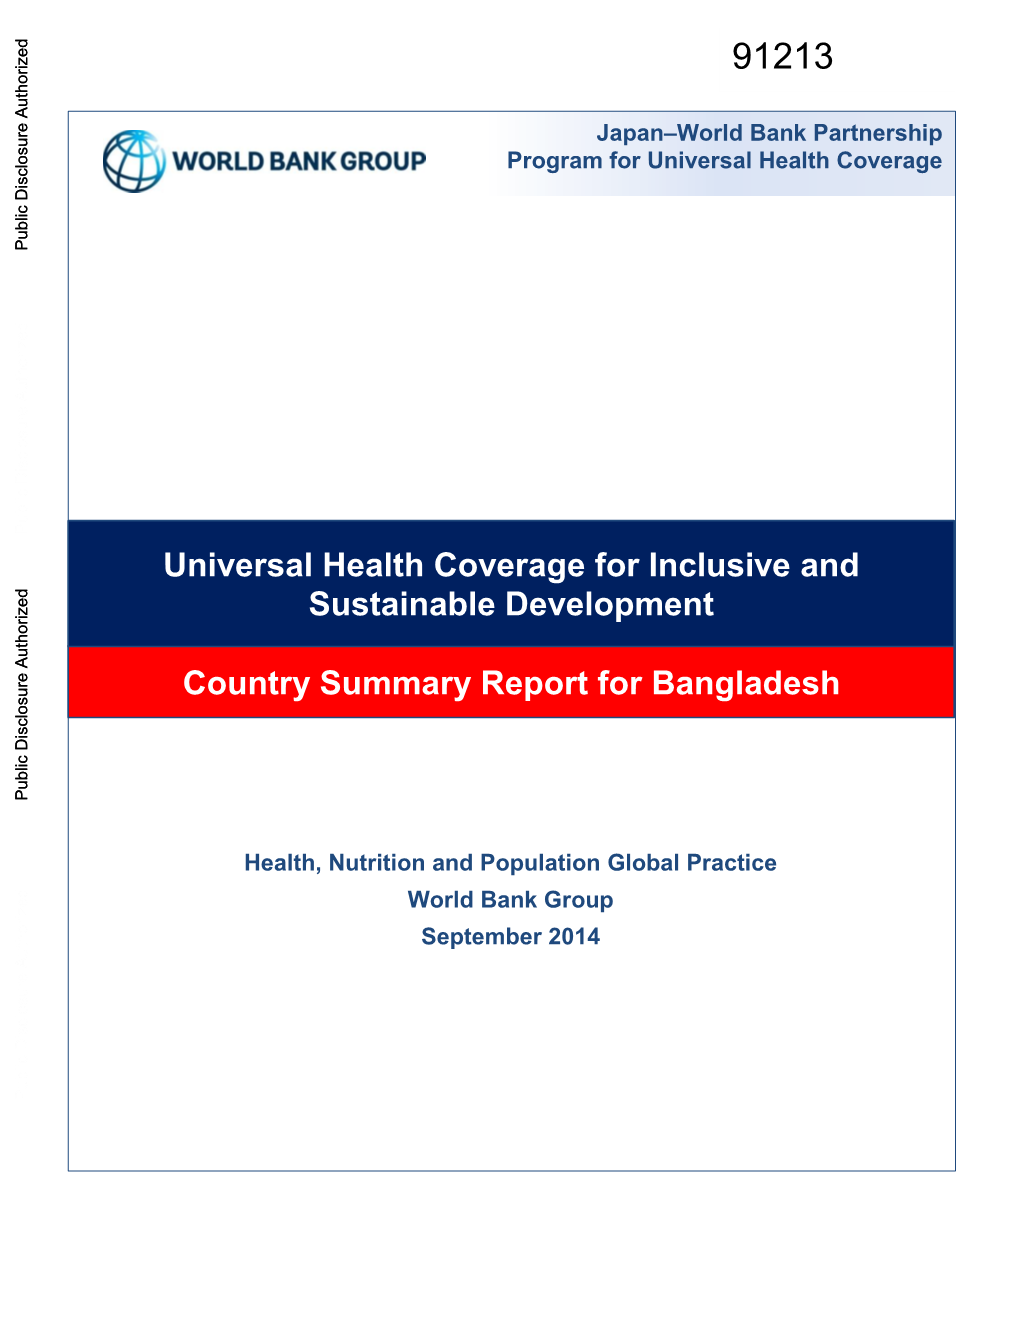 Country Summary Report for Bangladesh